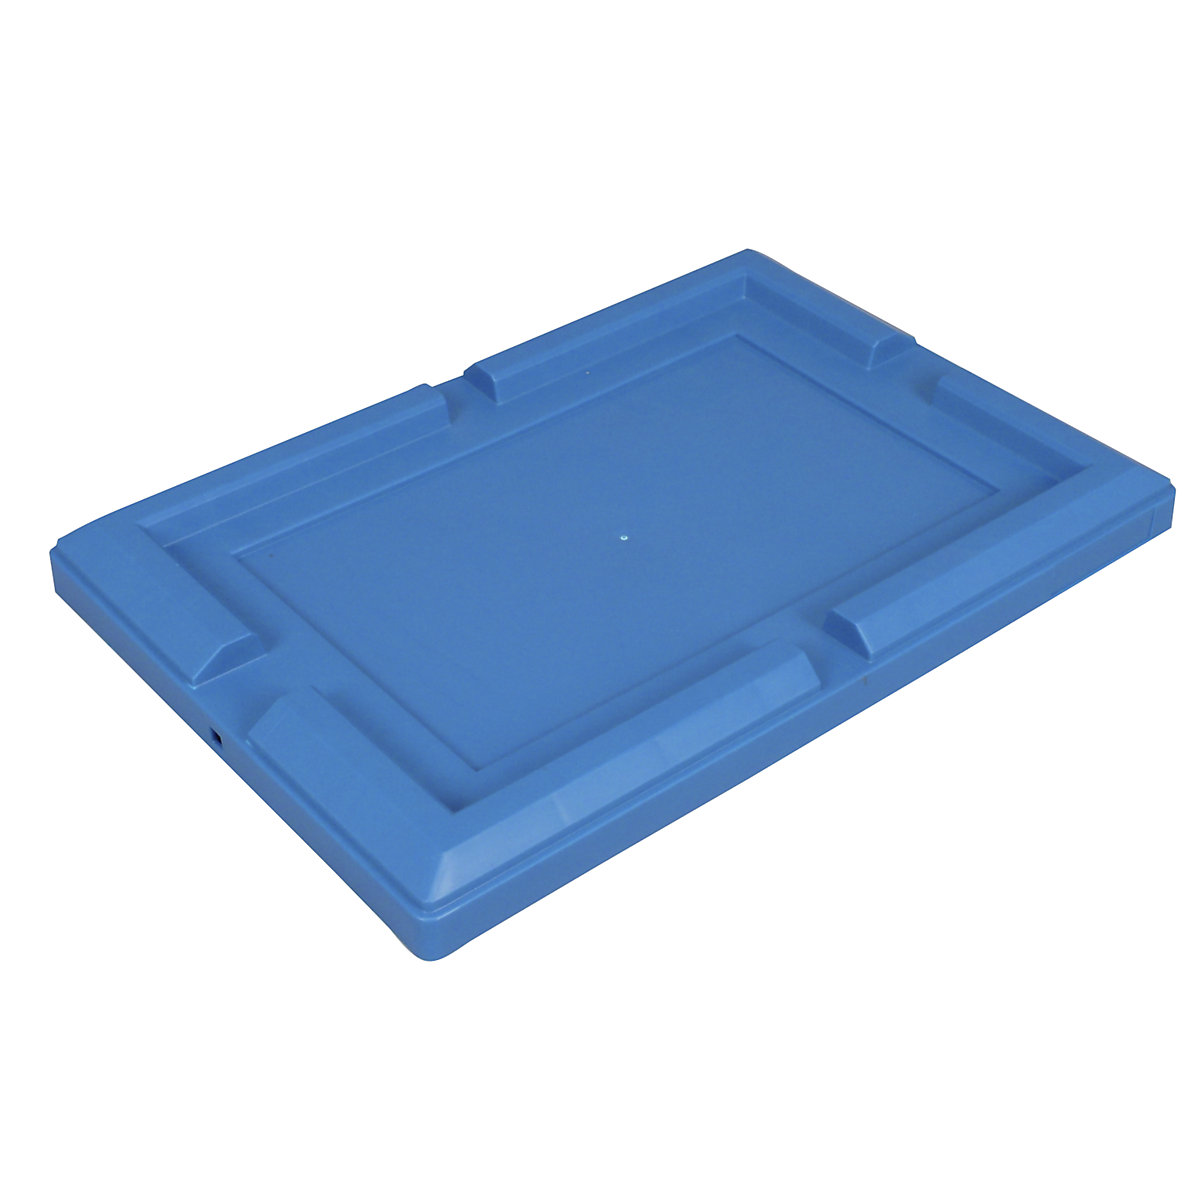 Lid for transport container, pack of 4